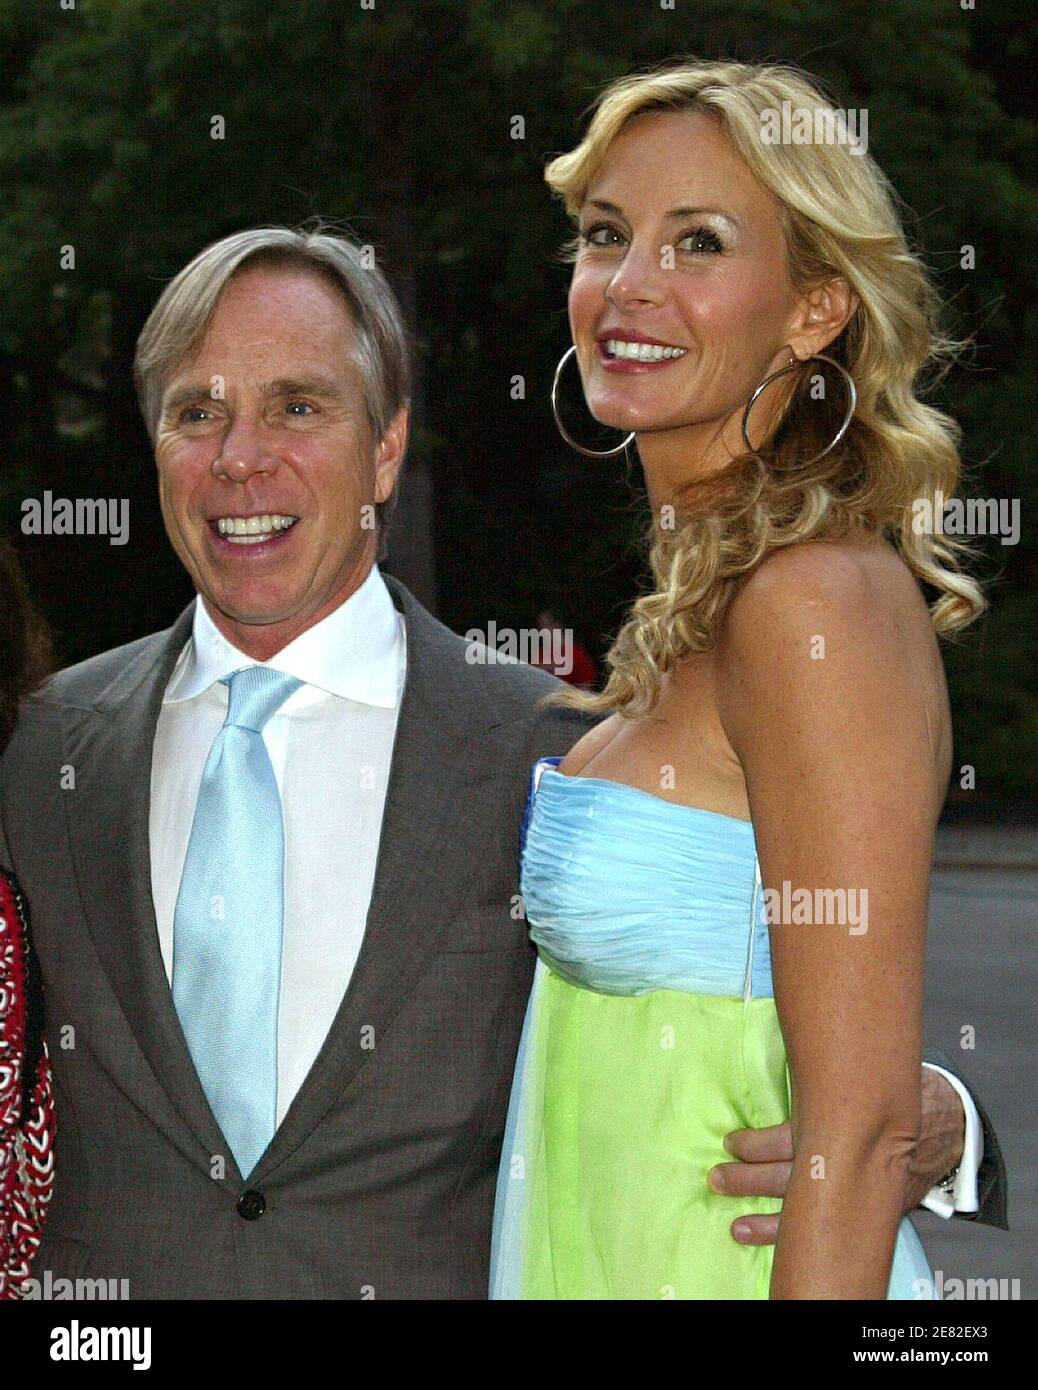 Fashion designer Tommy Hilfiger and his girlfriend Dee Ocleppo attend the  2007 Fresh Air Fund Benefit Gala, held at the Tavern on the Green  restaurant inside Central Park in New York City,